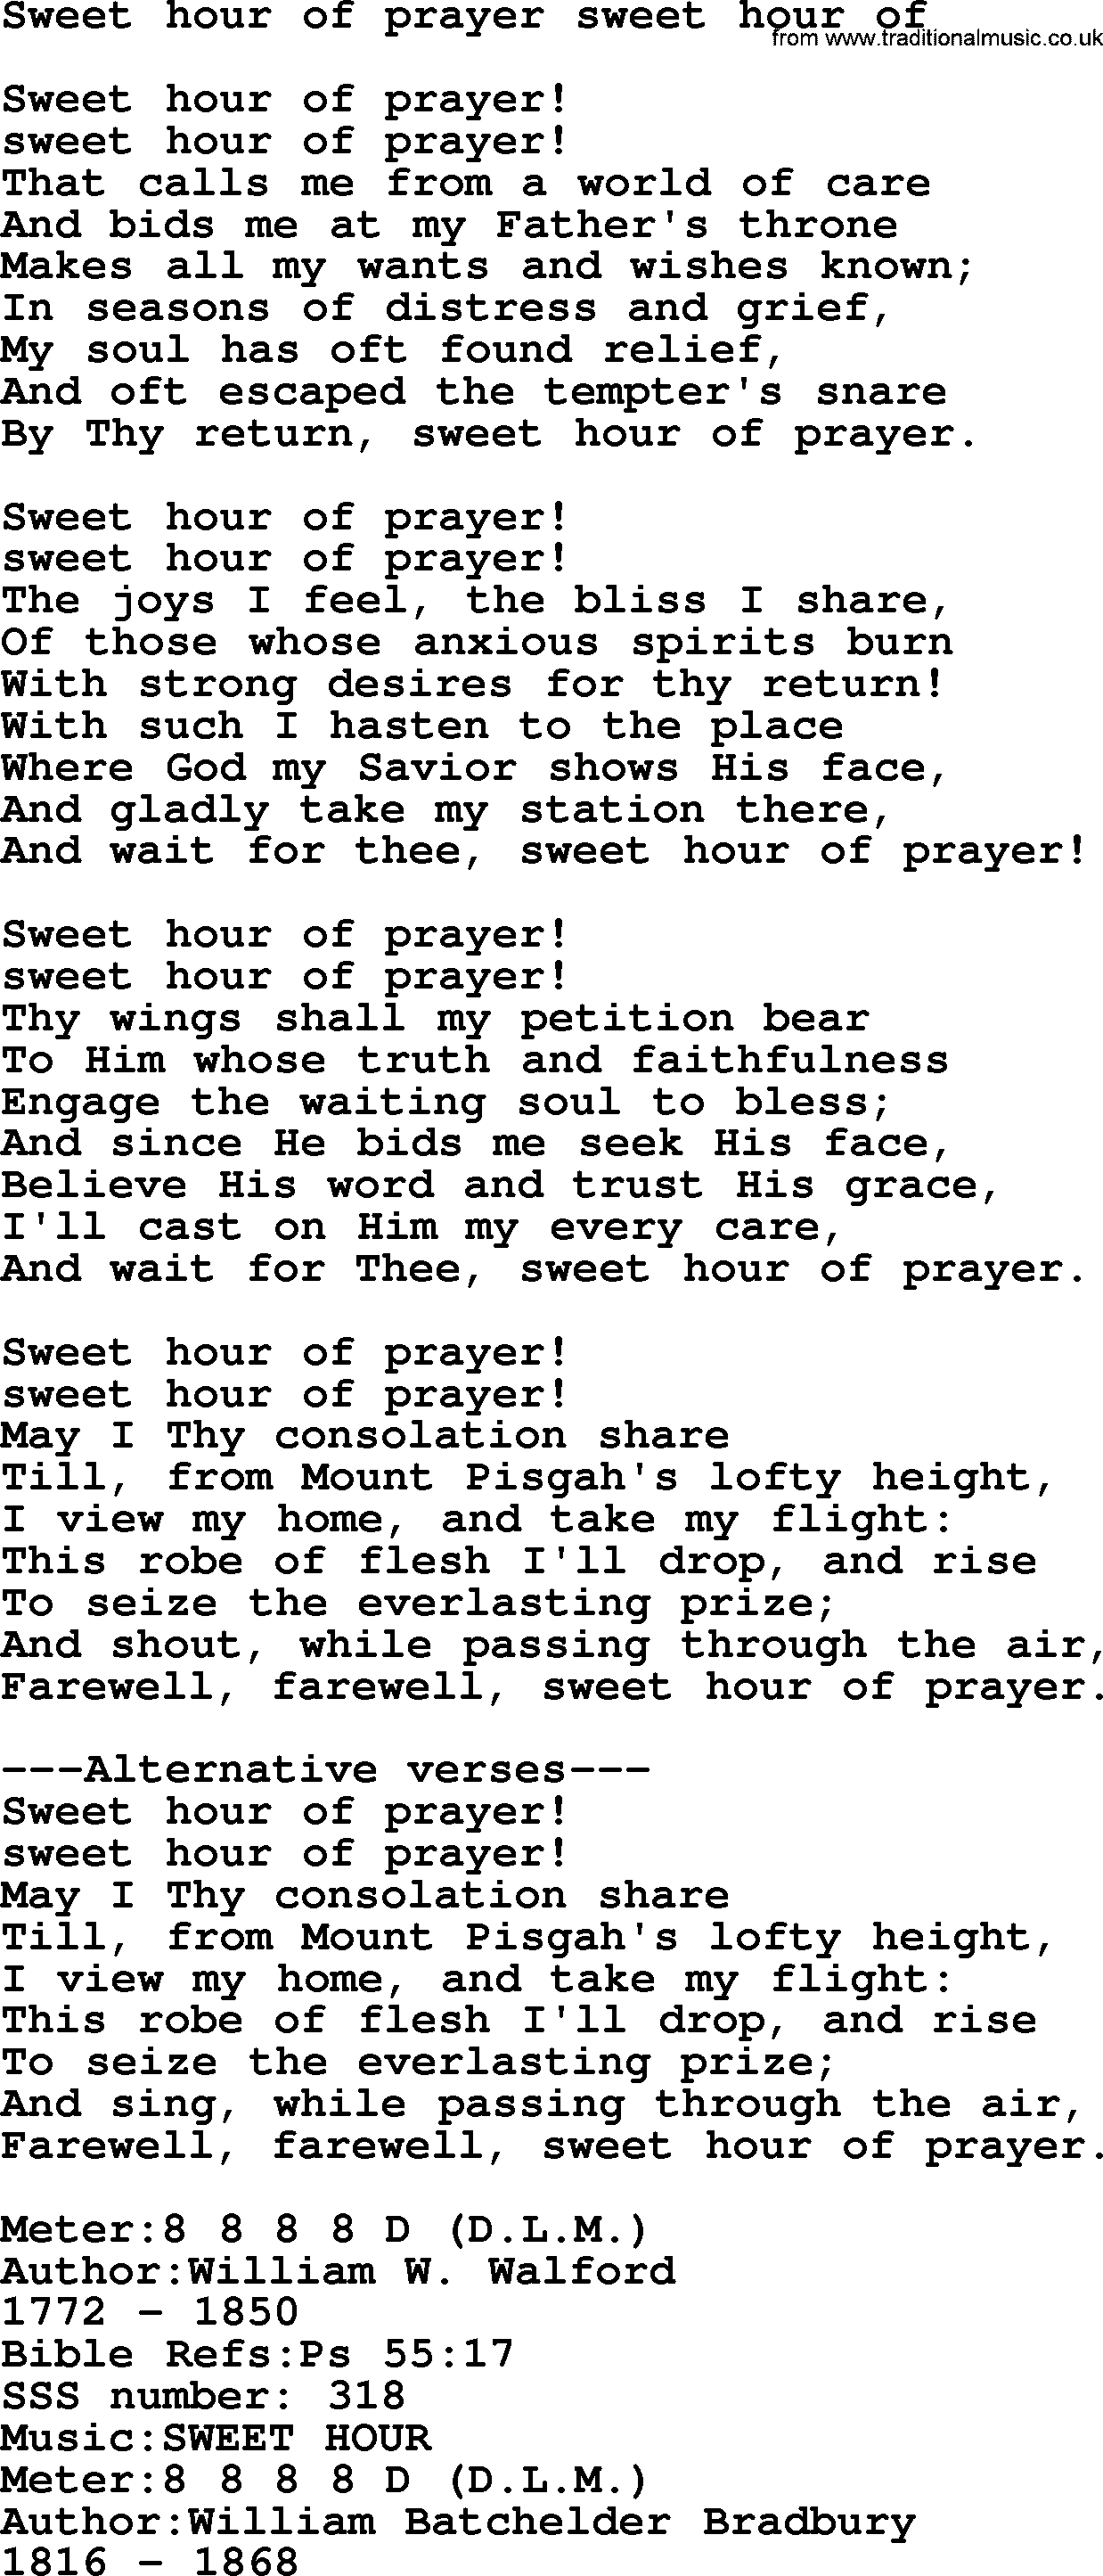 Sacred Songs and Solos complete, 1200 Hymns, title: Sweet Hour Of Prayer Sweet Hour Of, lyrics and PDF